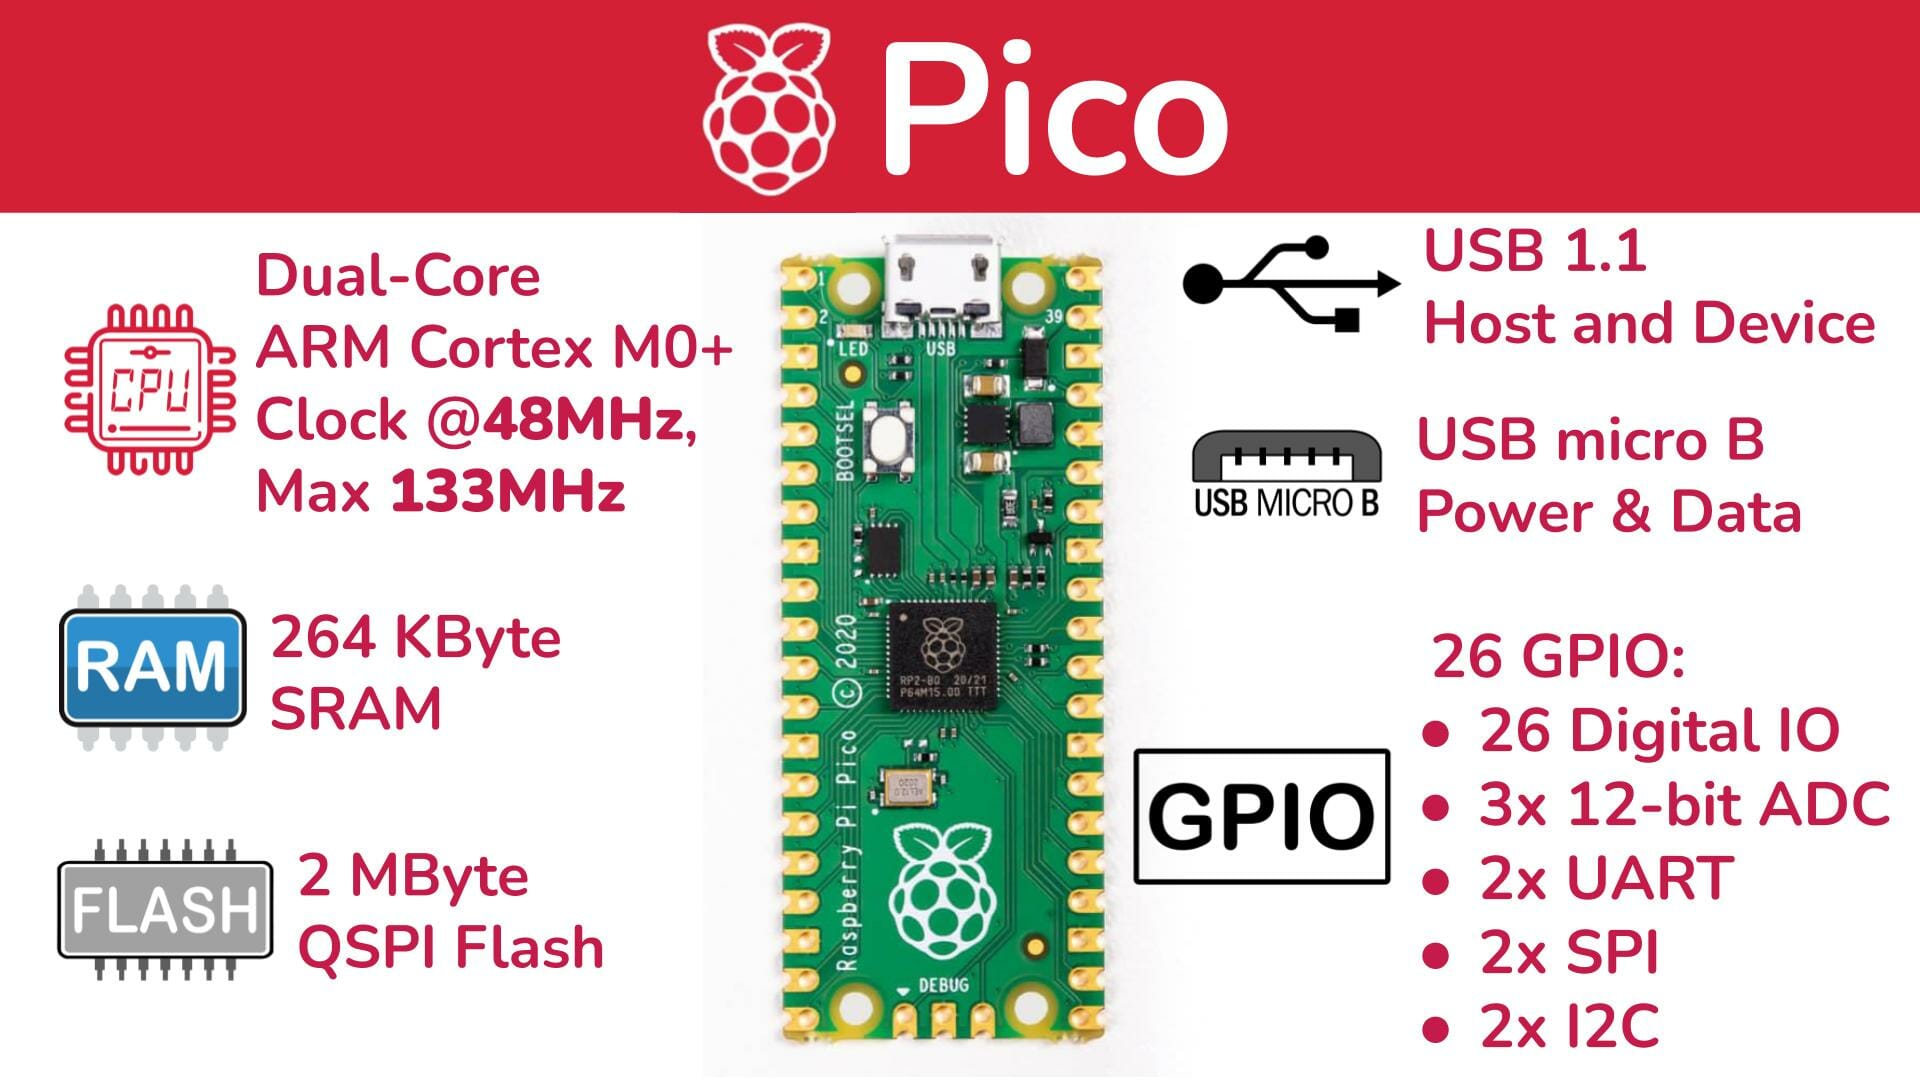 Rpi Pico Overview Hd